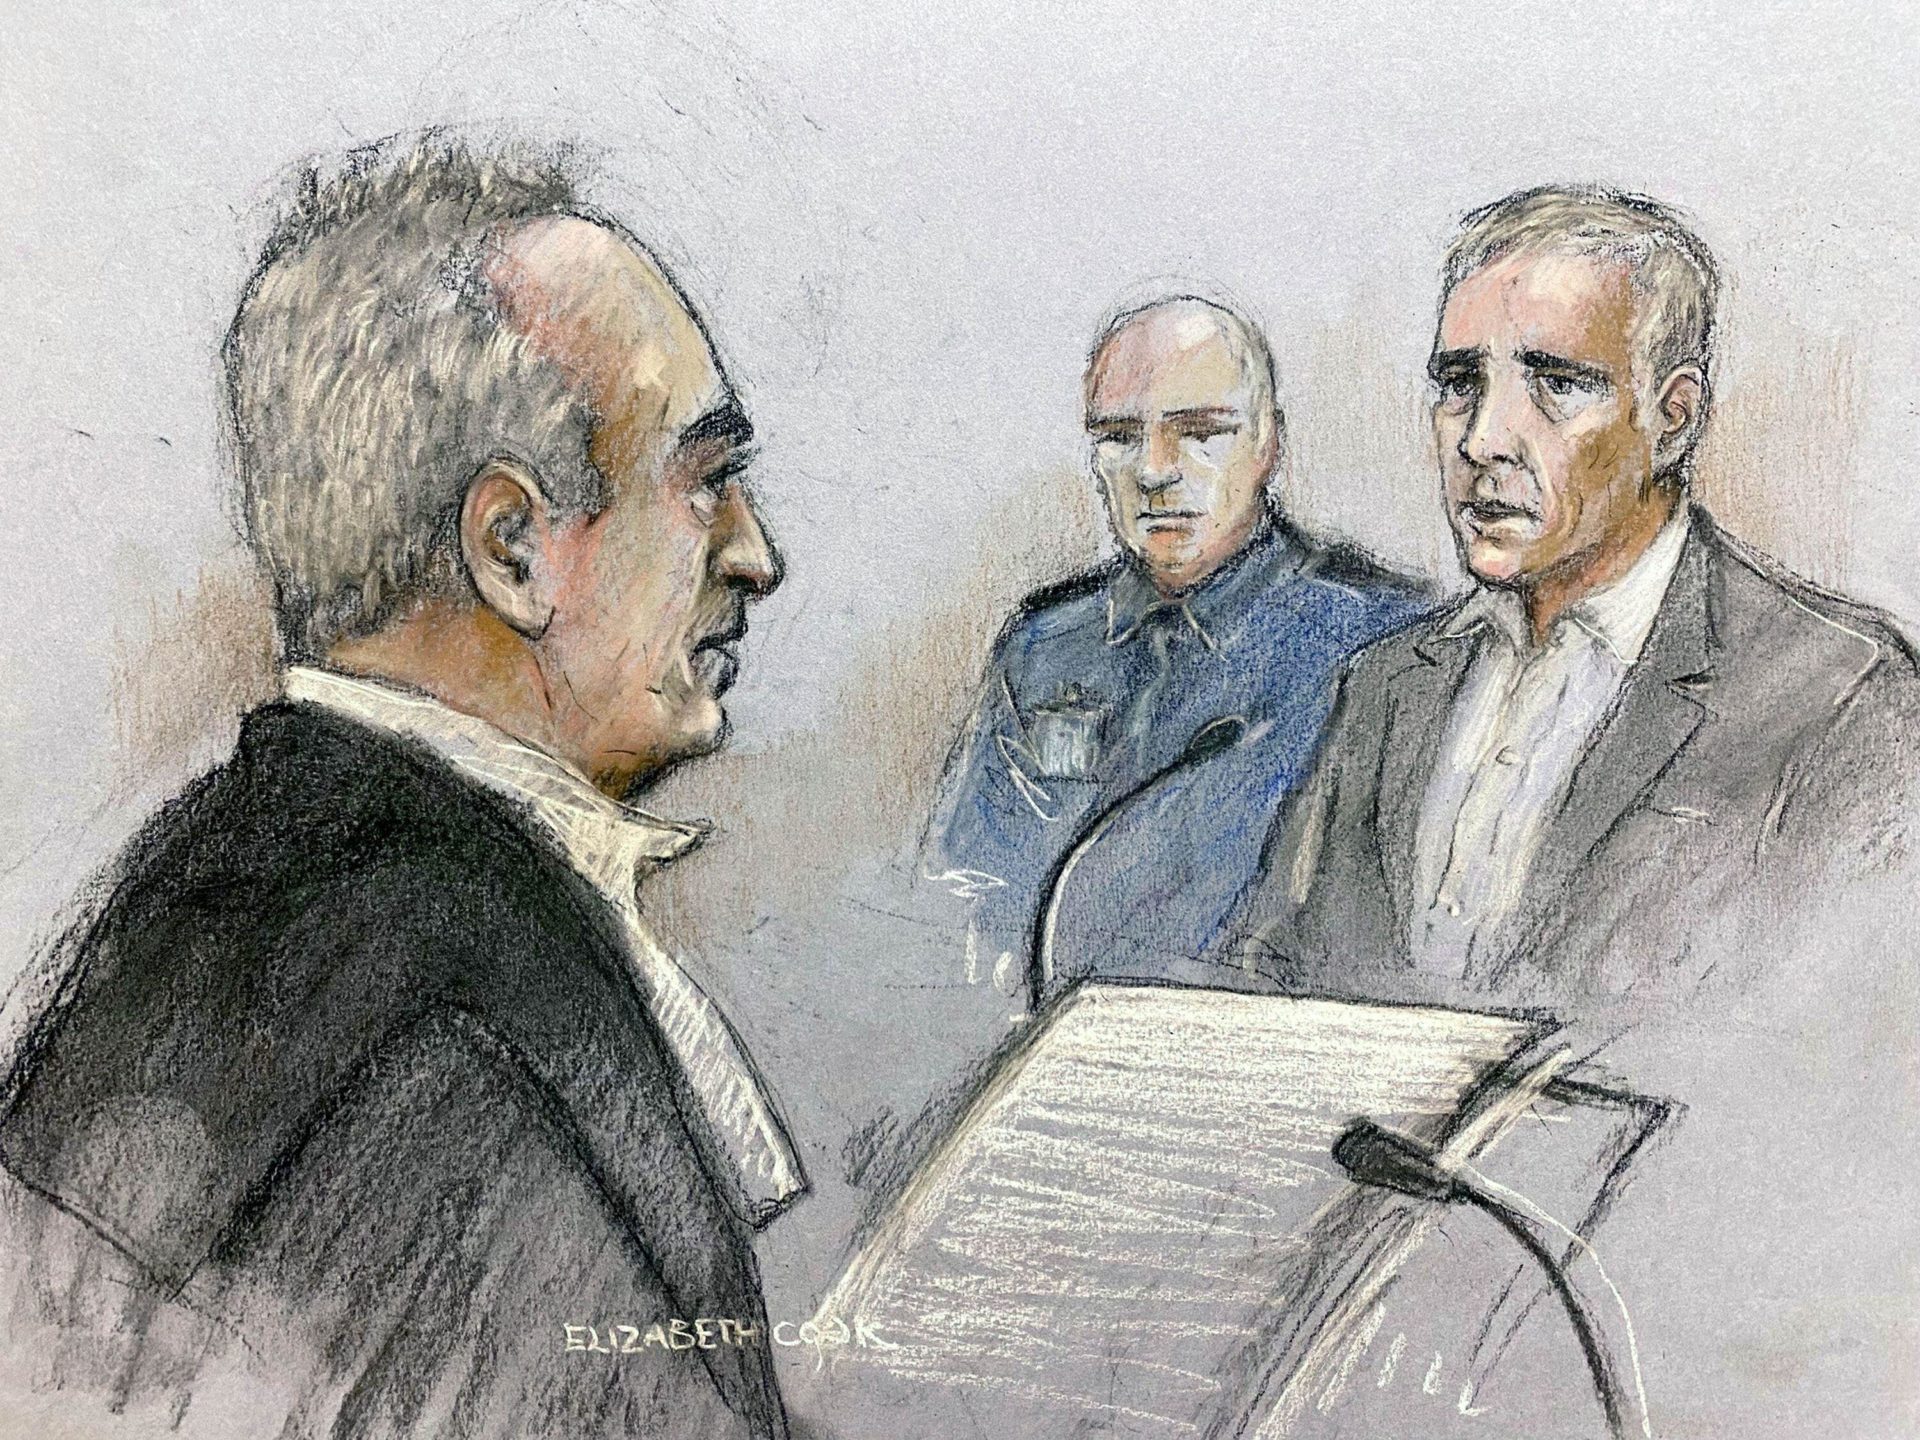 Court artist sketch by Elizabeth Cook of former Sinn Fein councillor Jonathan Dowdall being cross examined by Mr Hutch's defence barrister, Brendan Grehan SC during the trial at the Special Criminal Court, Dublin, of Gerry "The Monk" Hutch for the murder of David Byrne at a hotel in Dublin in 2016